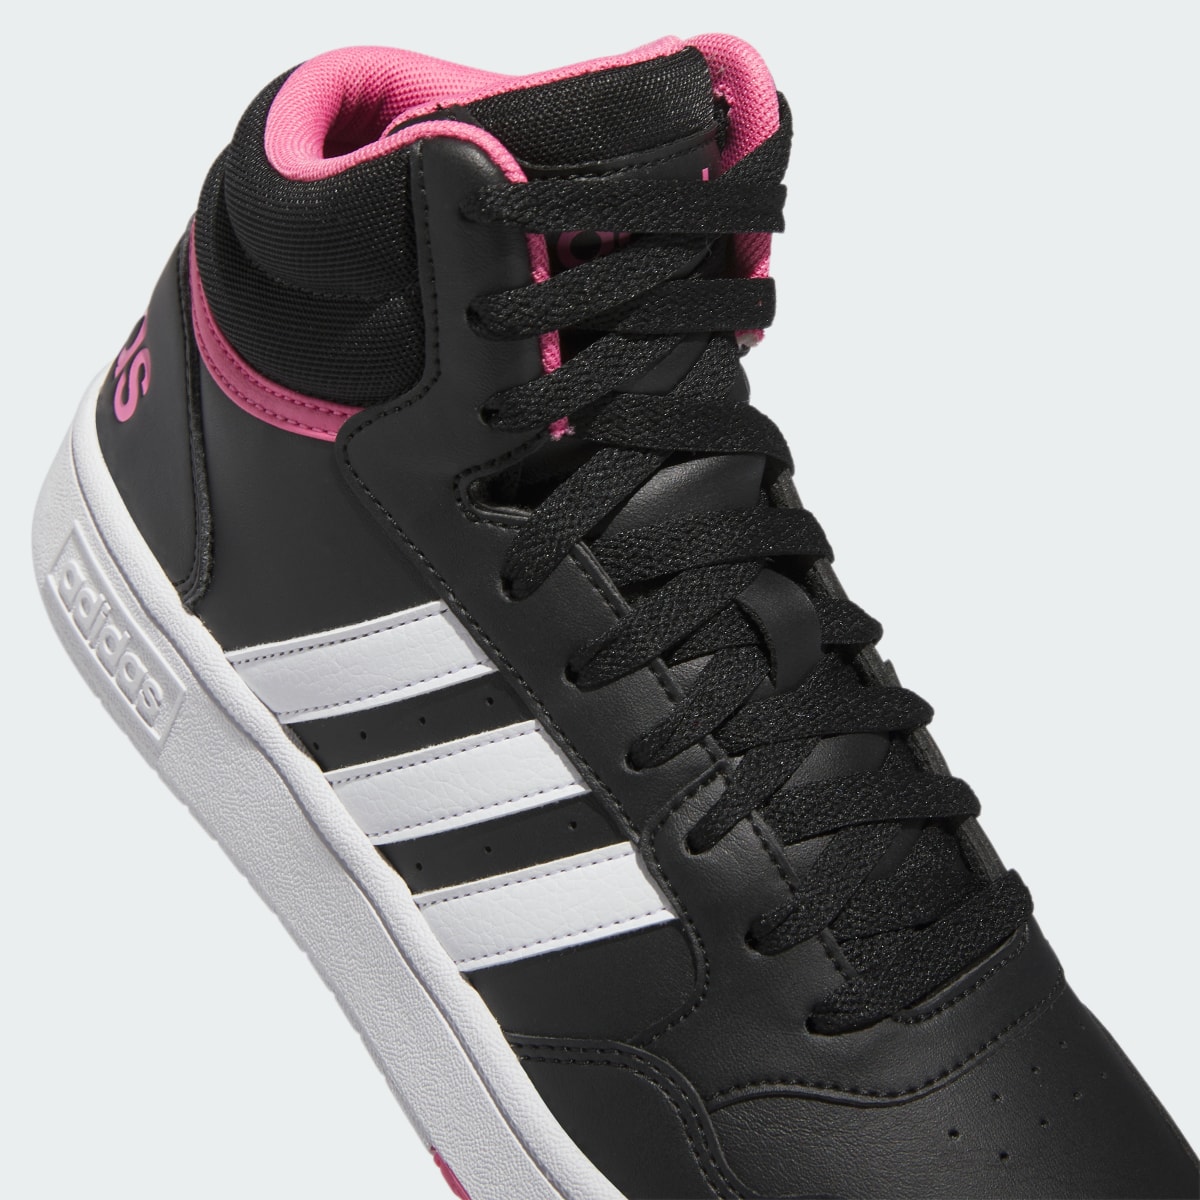 Adidas Hoops 3.0 Mid Shoes. 9